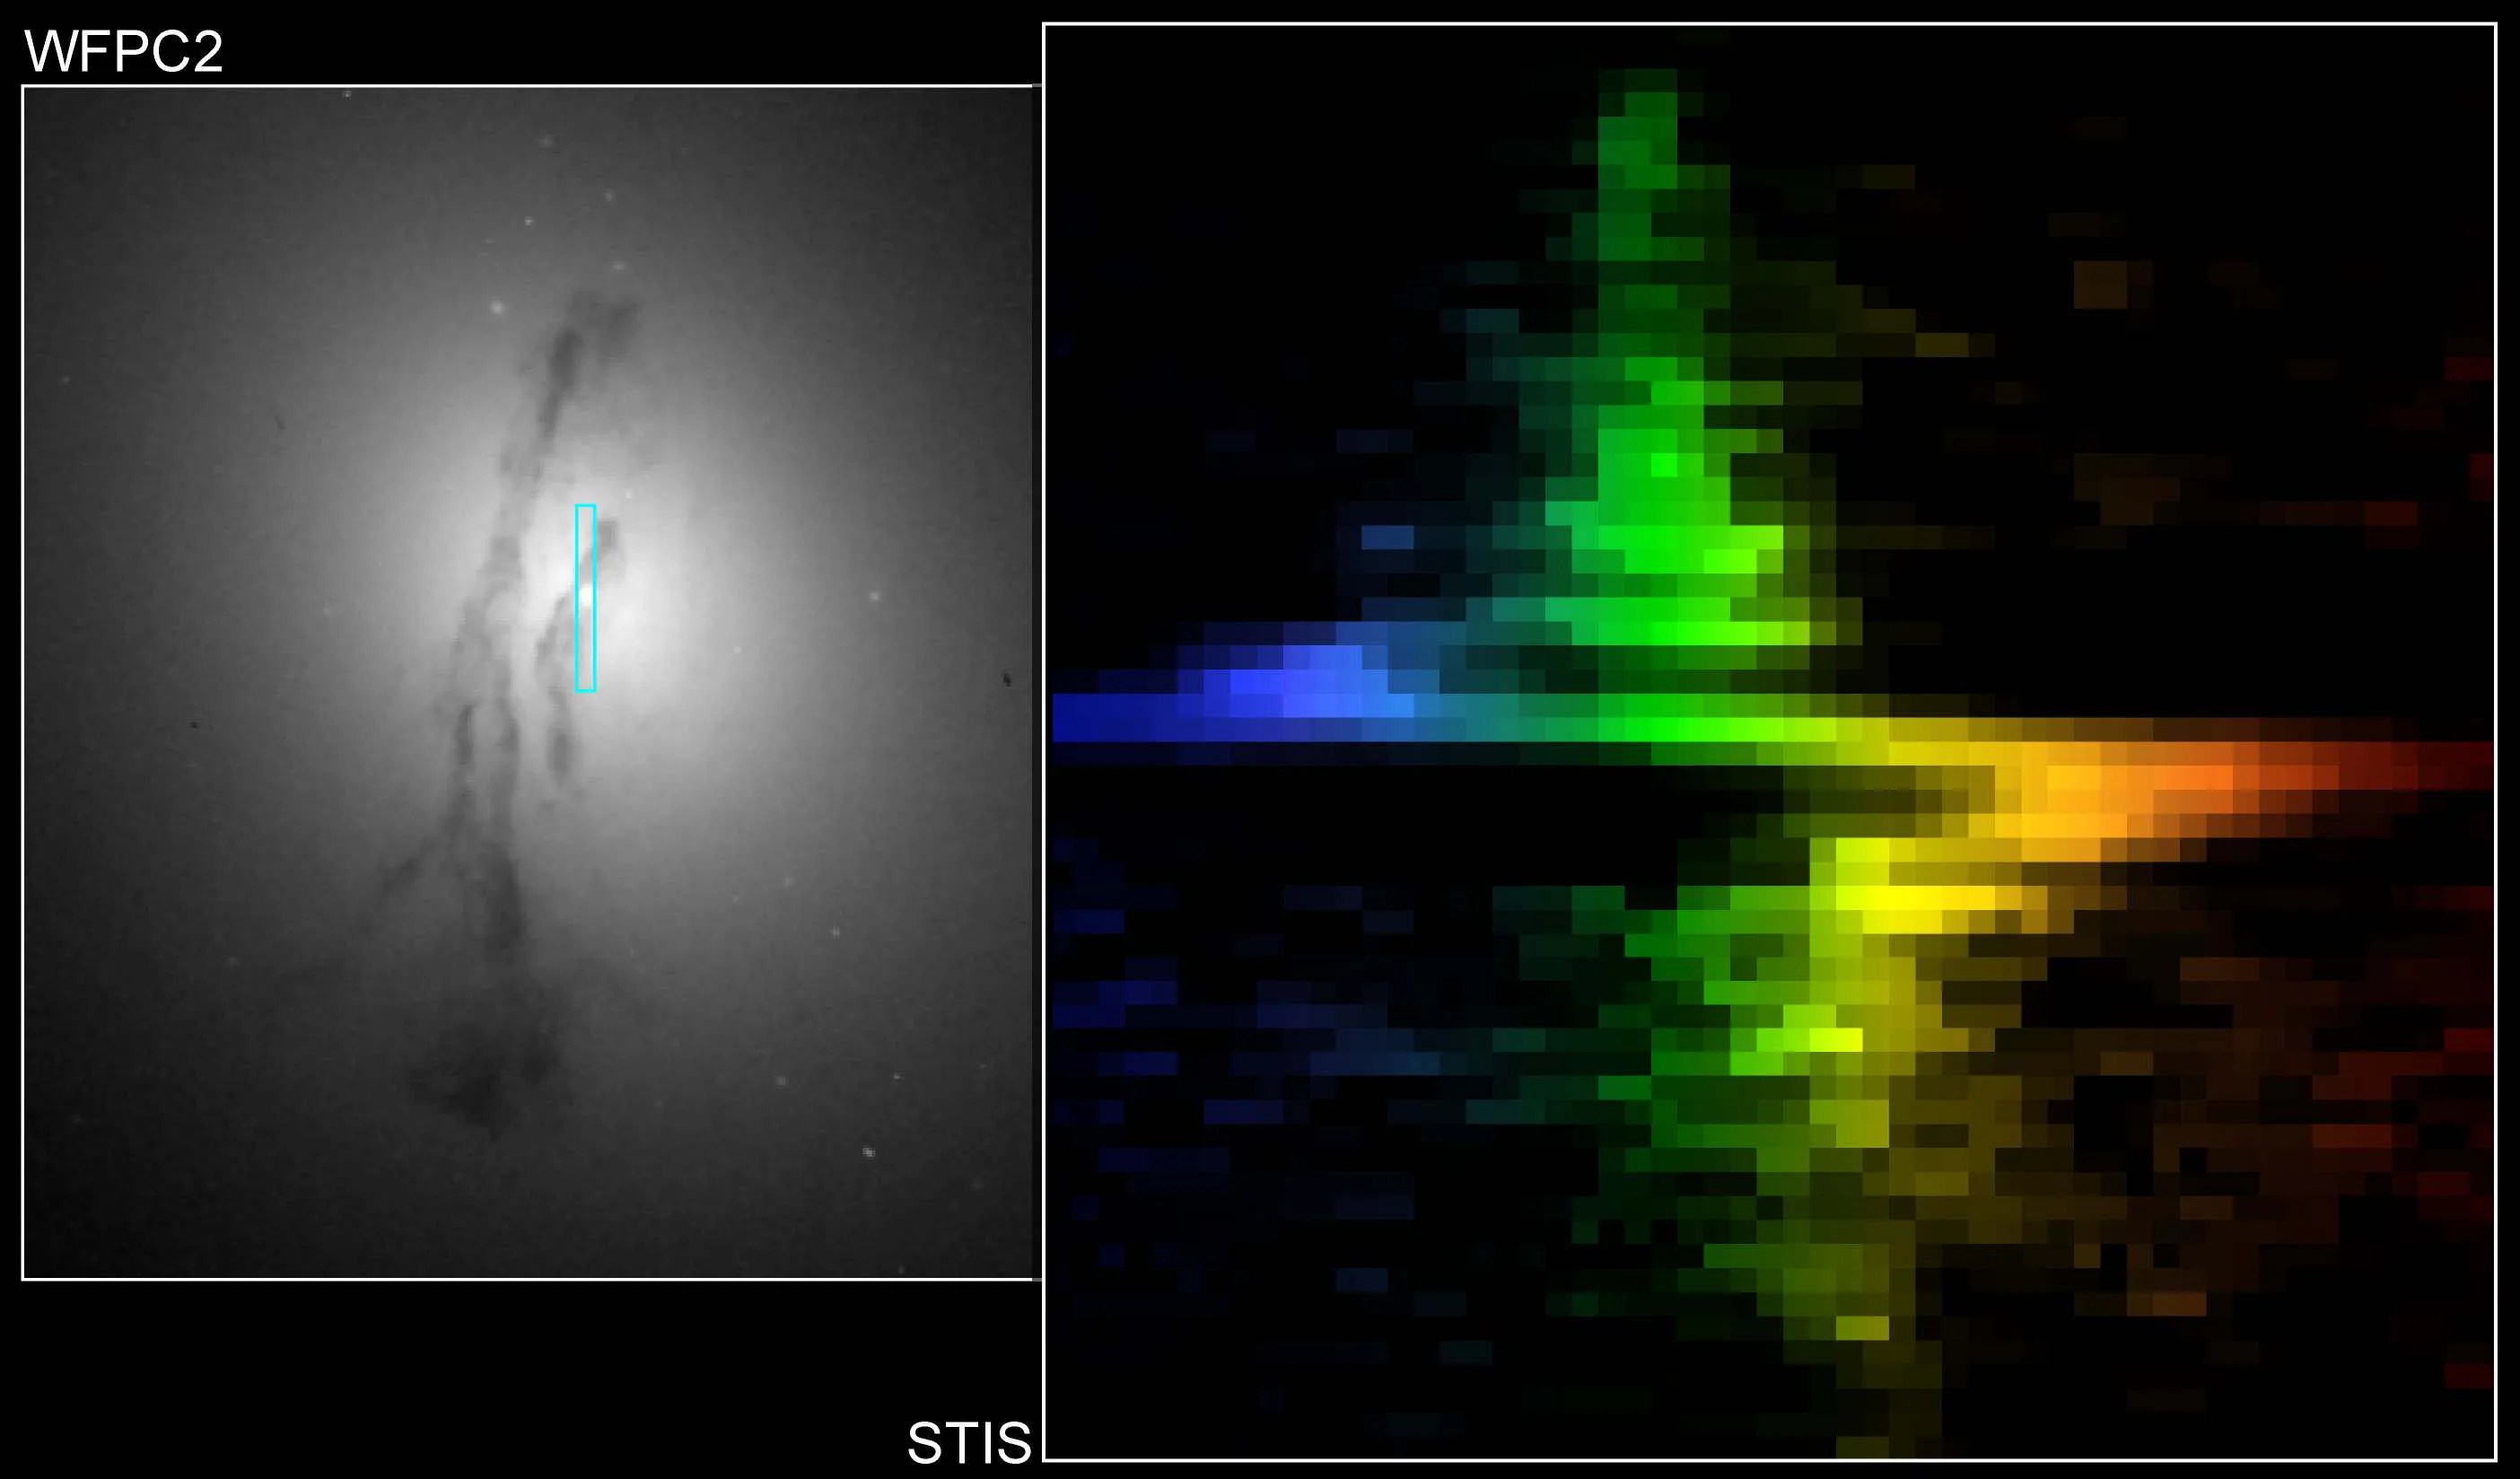 Hubble observations of M84 by WFPC2 (left) and STIS instruments